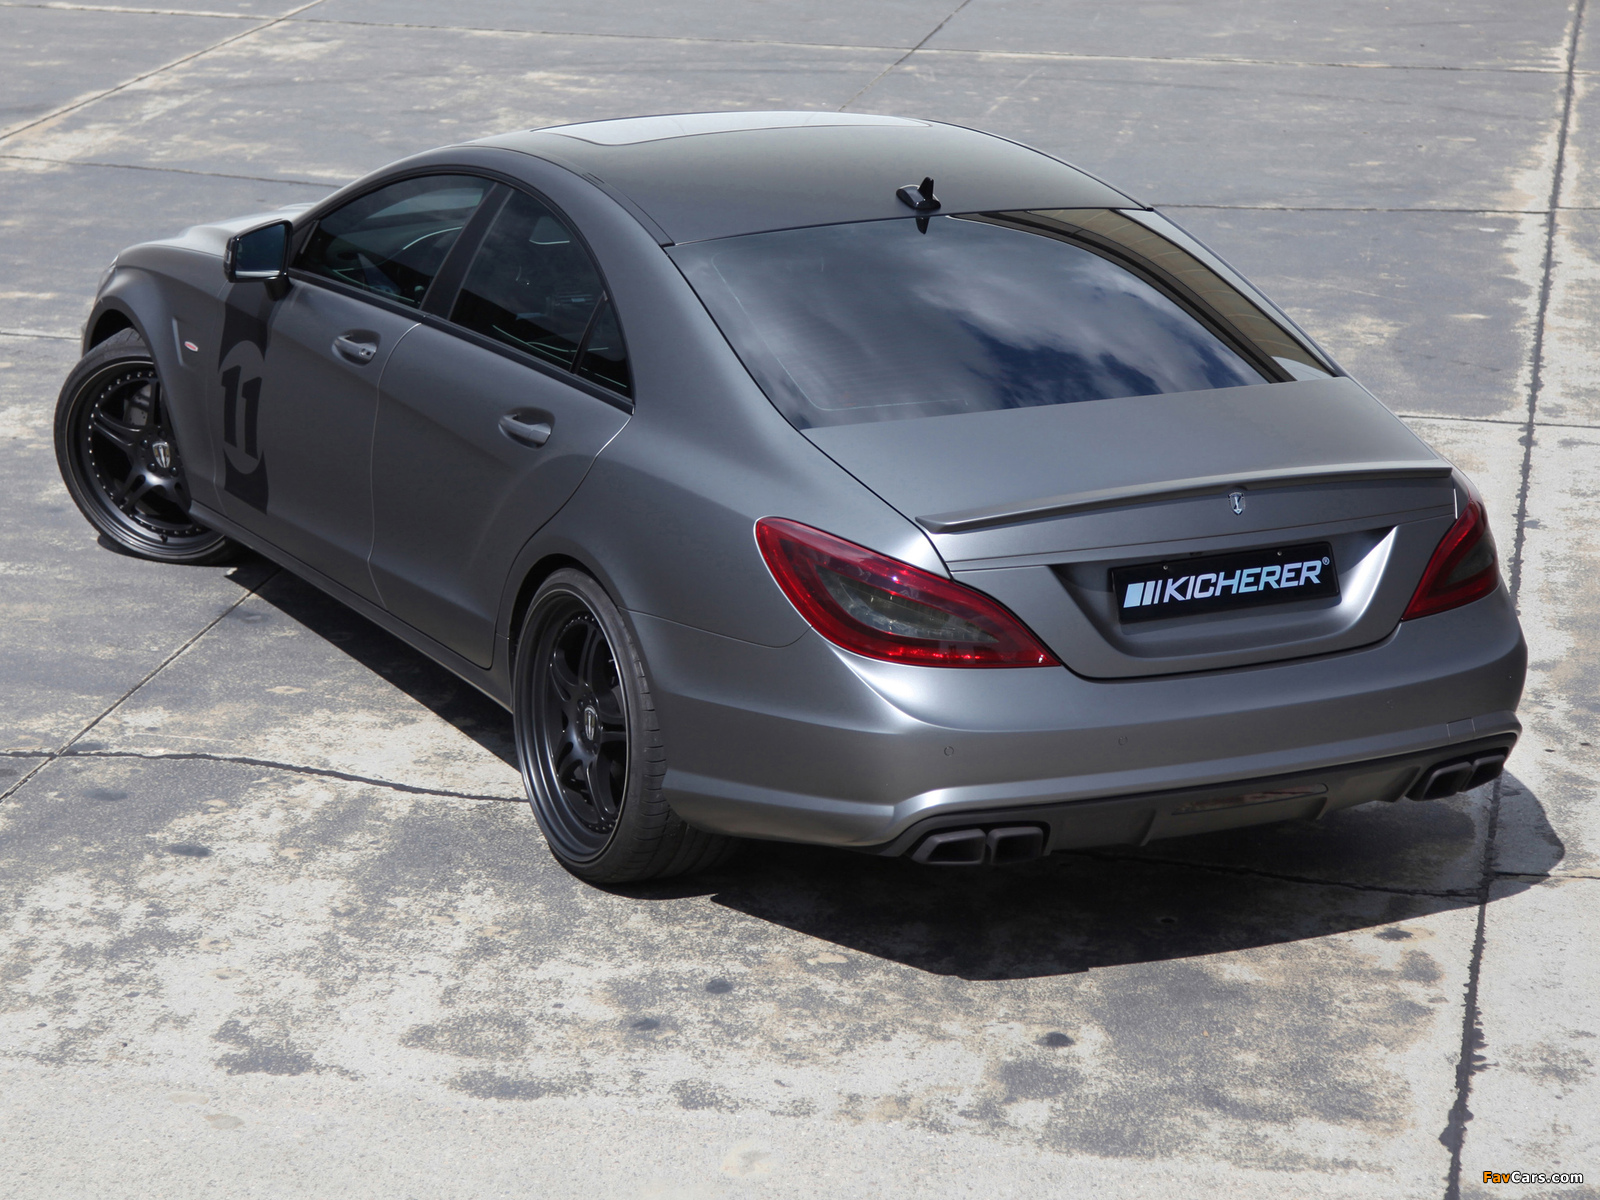 Kicherer Mercedes-Benz CLS 63 AMG Yachting (C218) 2012 images (1600 x 1200)